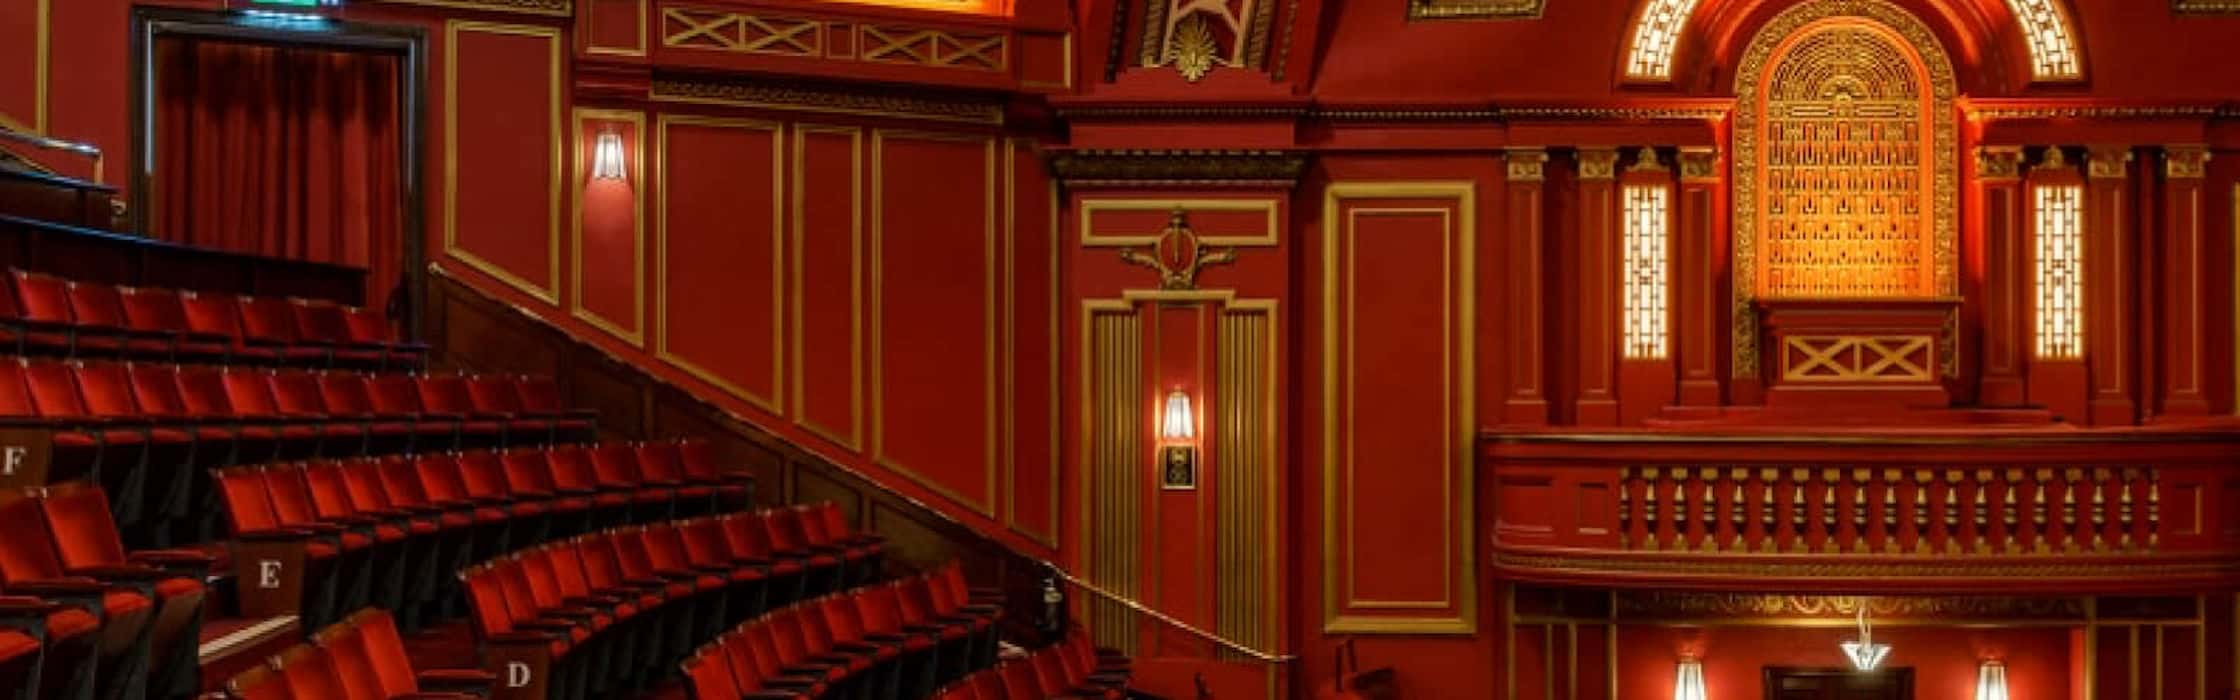 What's On at The Dominion Theatre, London